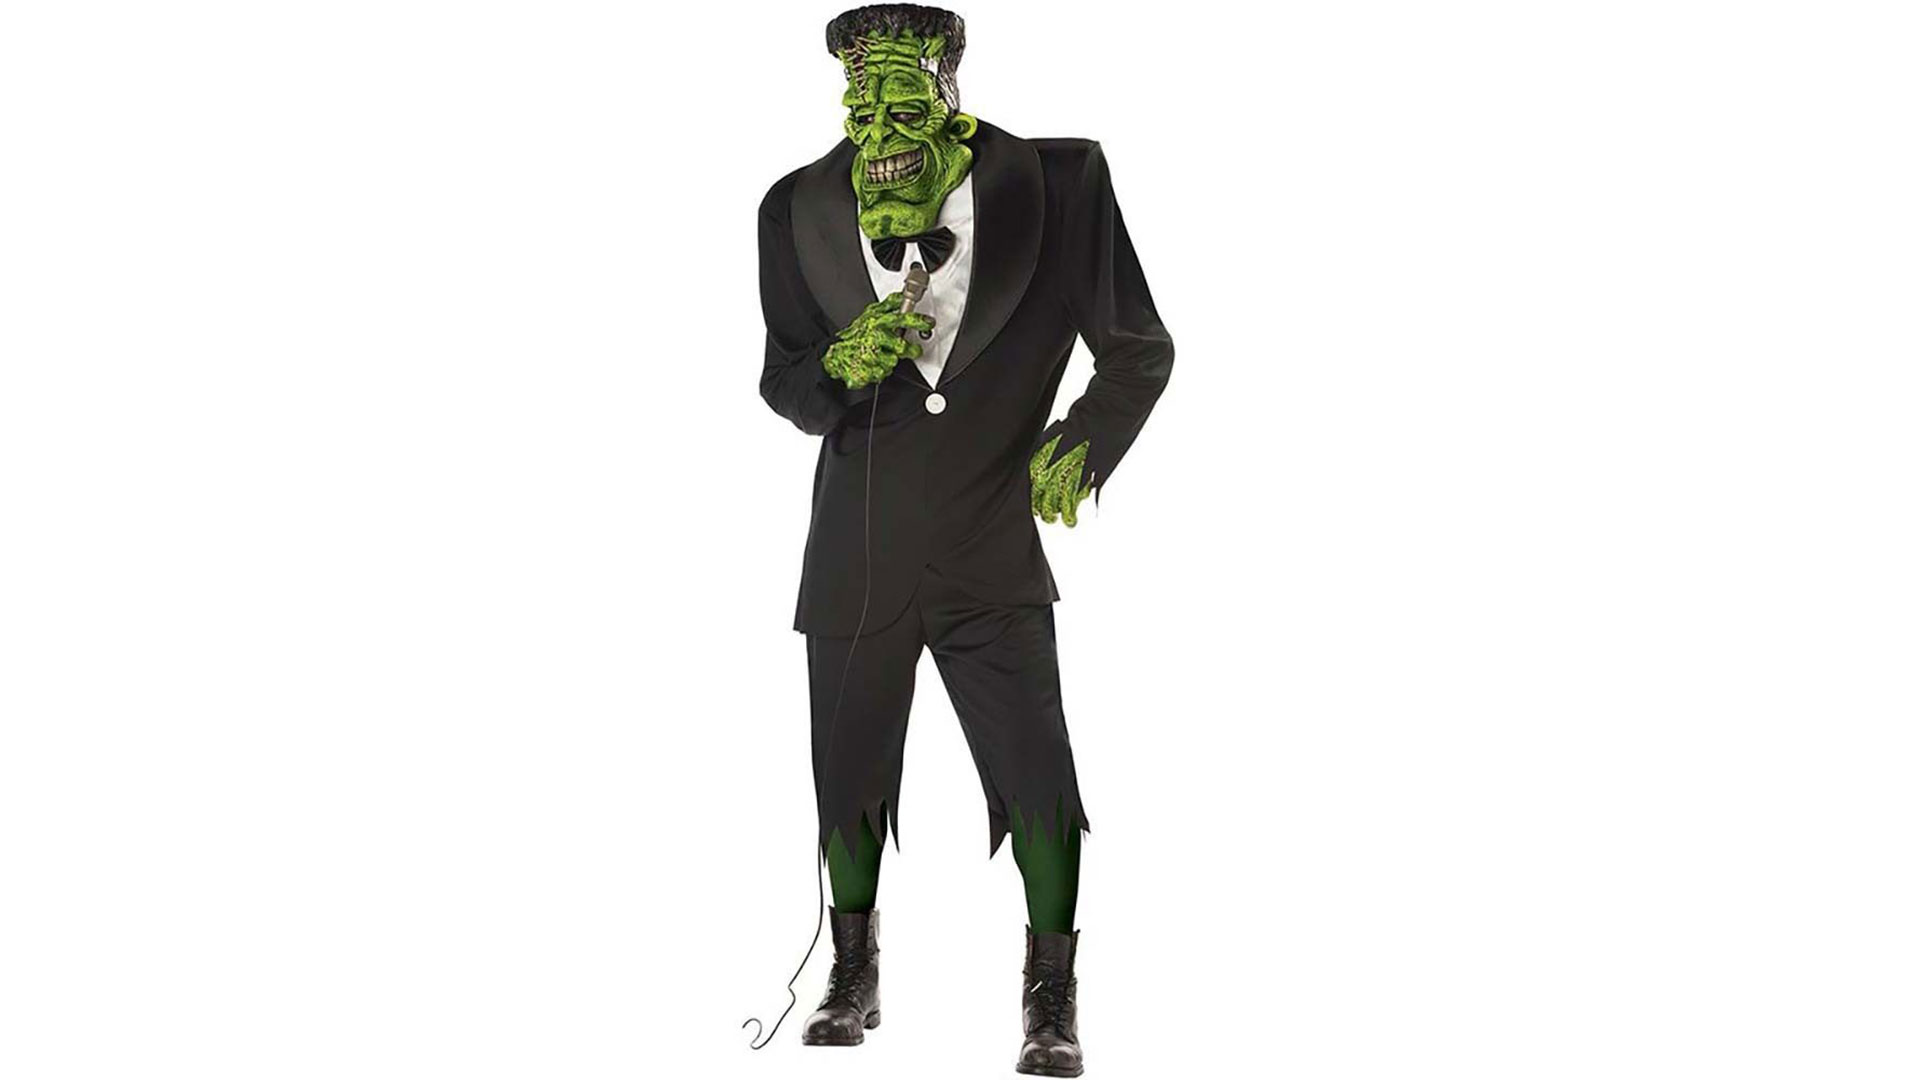 A man dressed in a Frankenstein costume for Halloween.